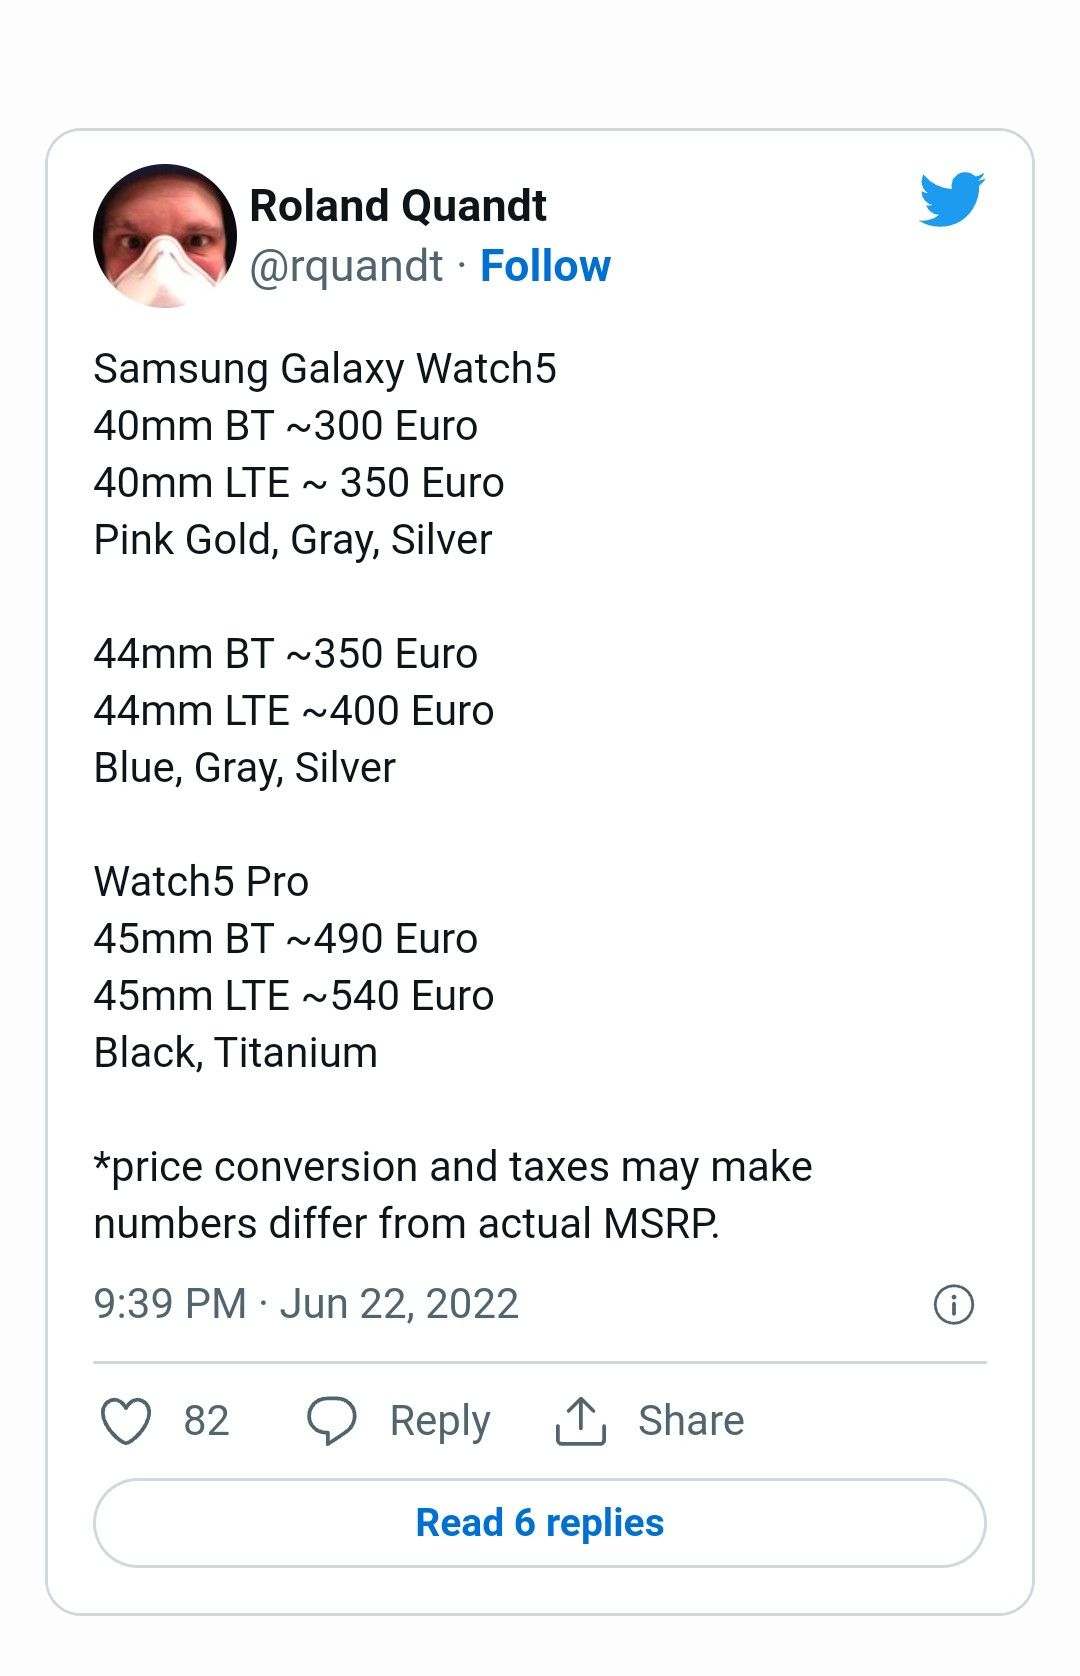 Samsung Galaxy Watch 5 series pricing revealed